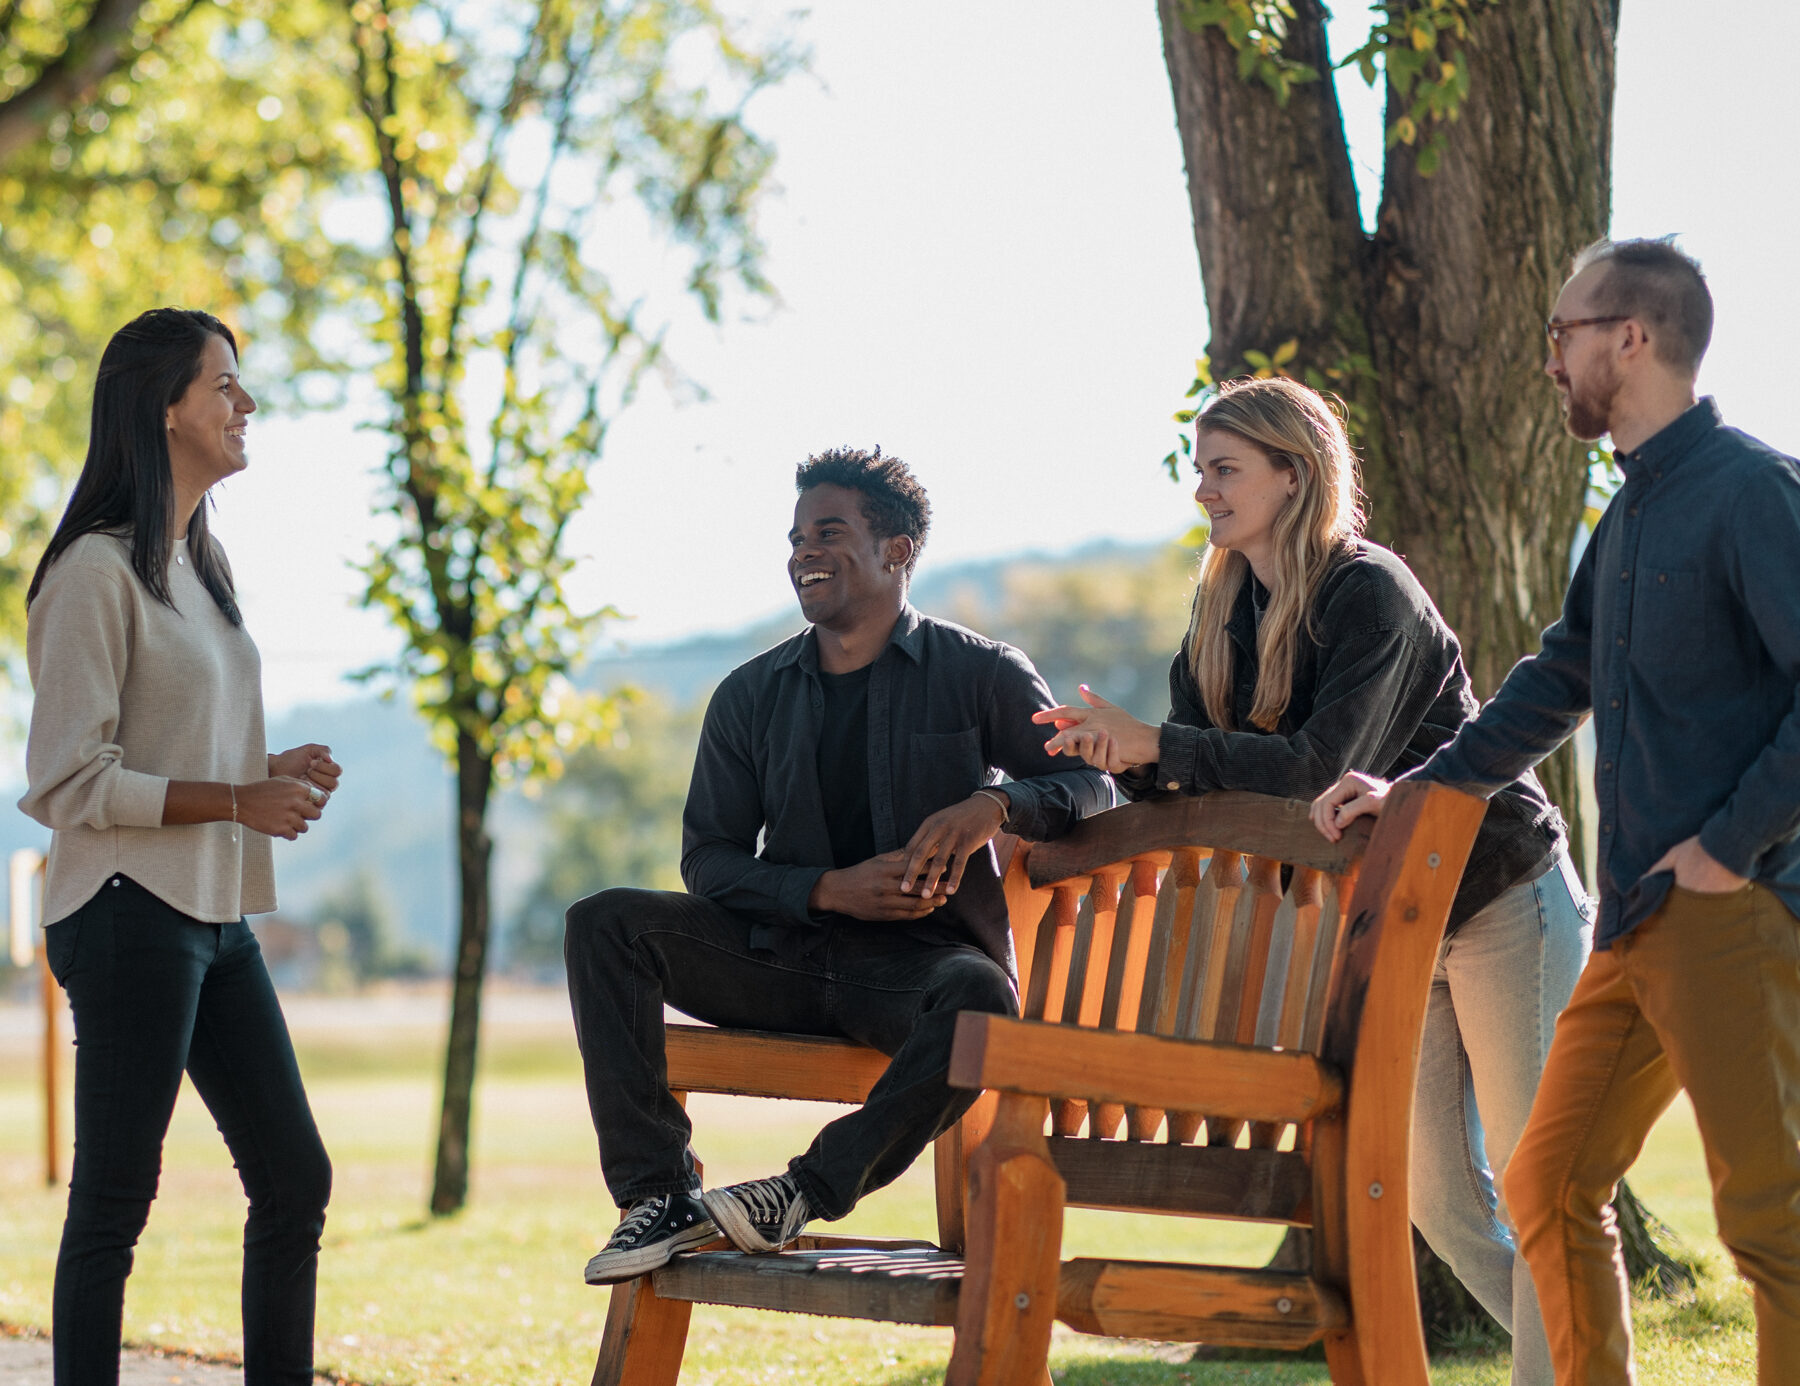 Four people talk together around a bench outside